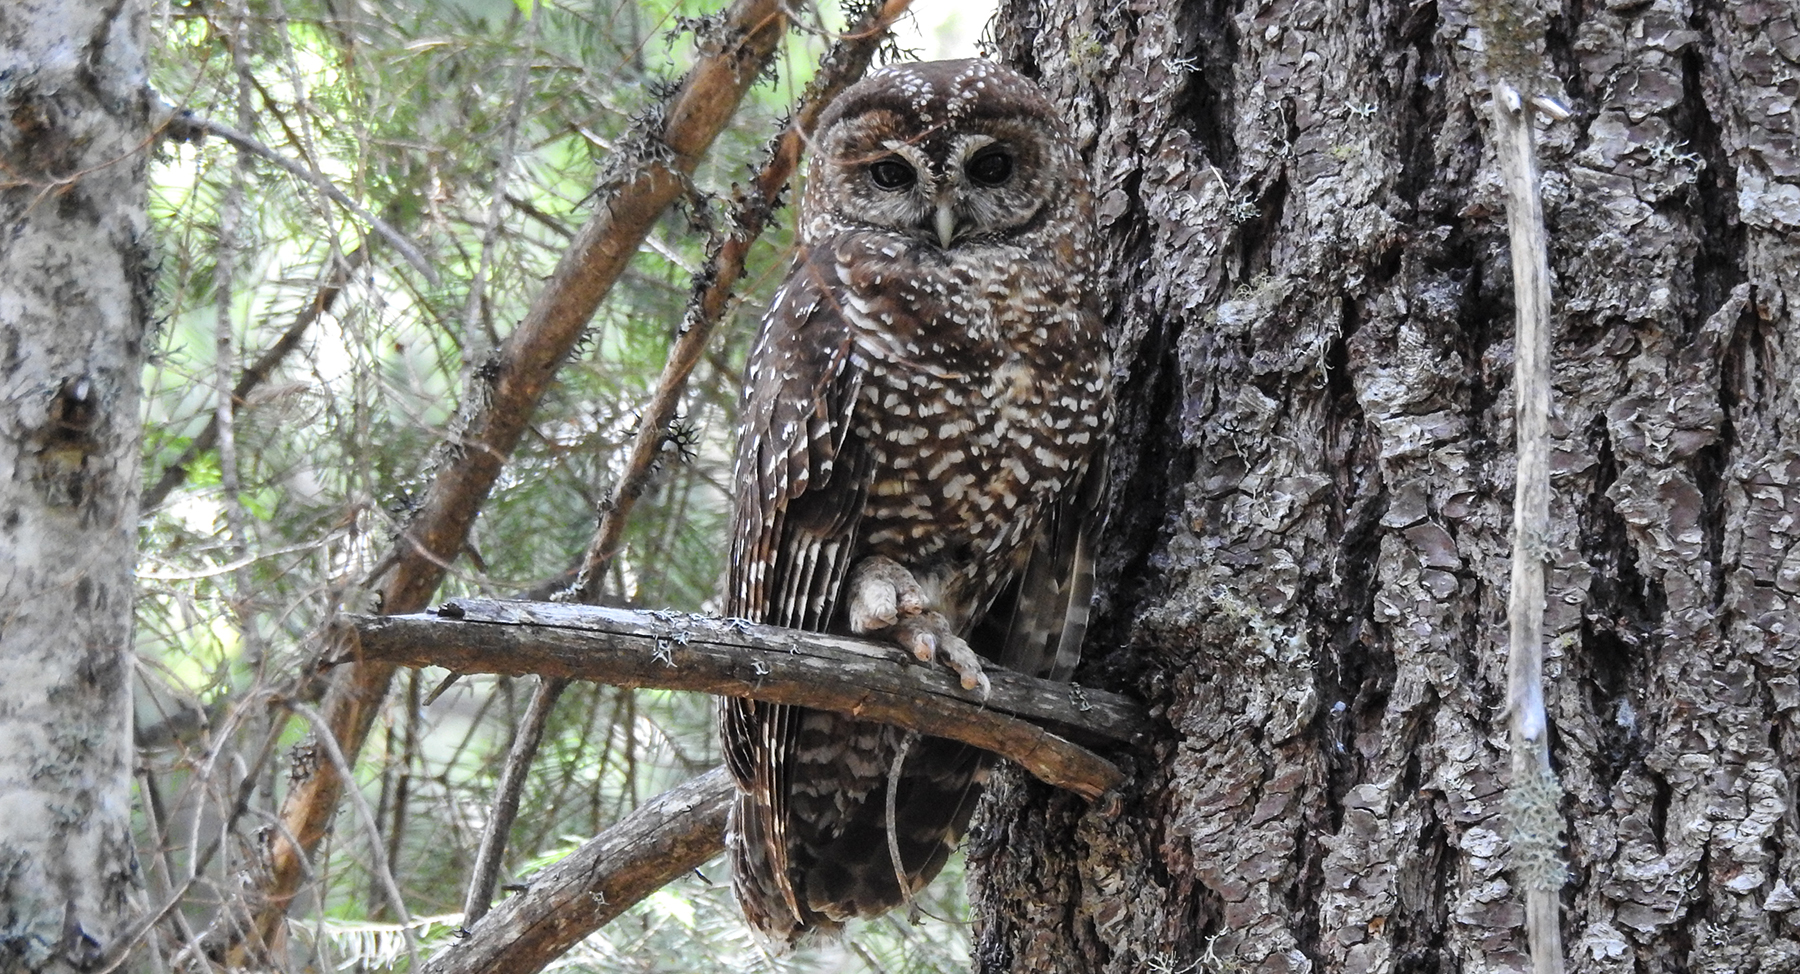 Spotted Owl on Tree Branch